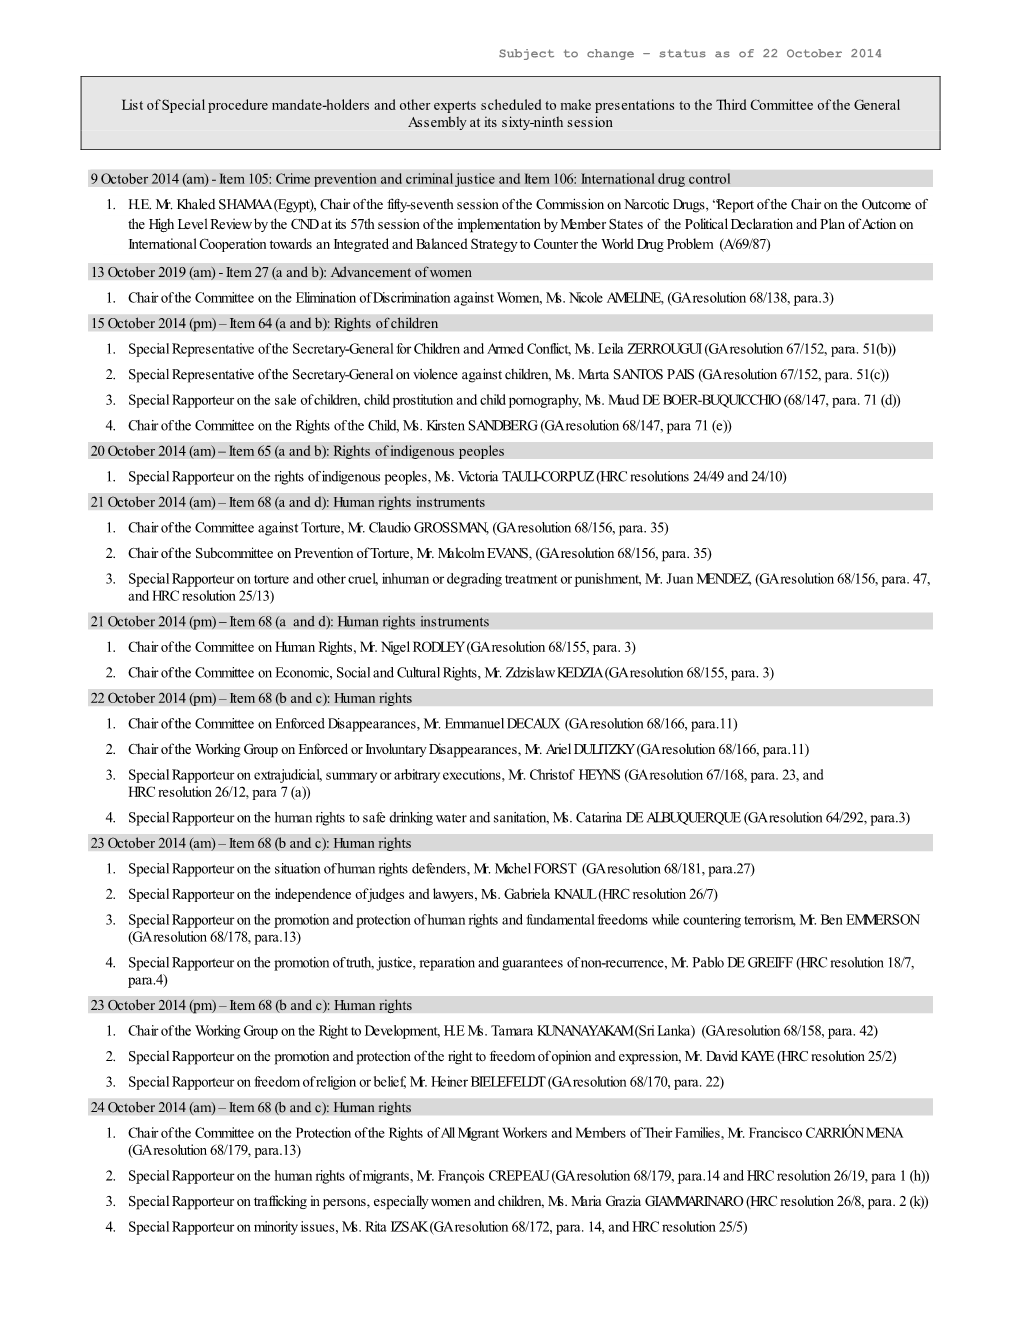 List of Special Procedure Mandate-Holders and Other Experts Scheduled to Make Presentations to the Third Committee of the General Assembly at Its Sixty-Ninth Session